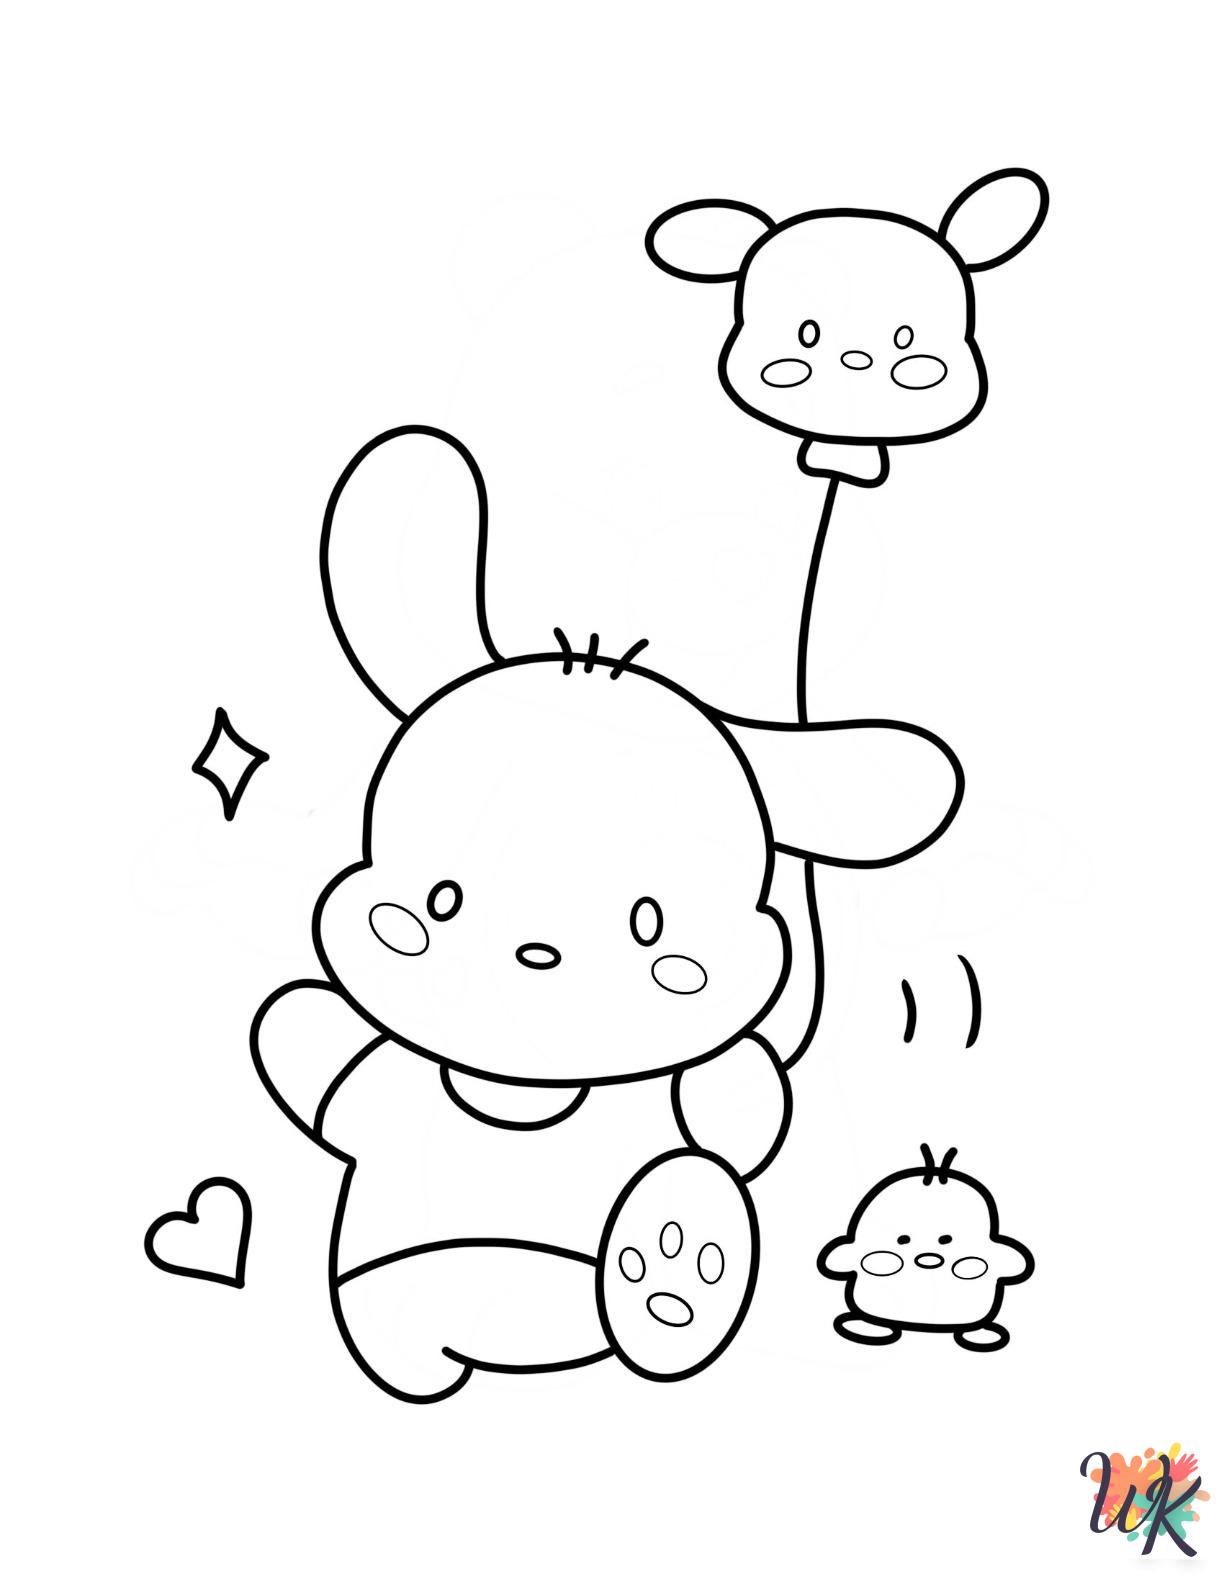 Pochacco free coloring pages